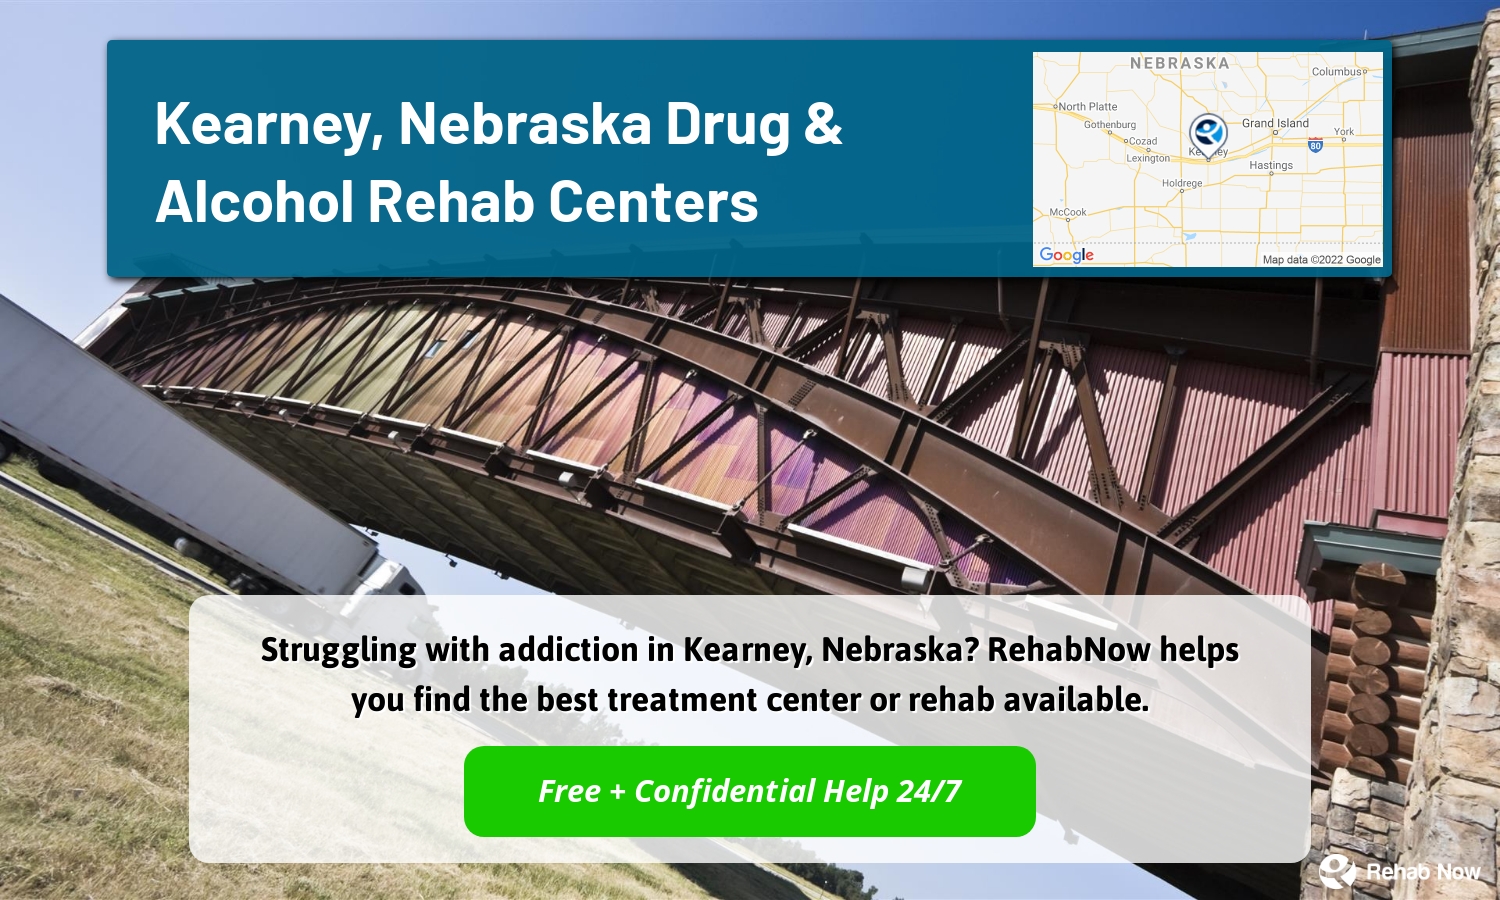 Struggling with addiction in Kearney, Nebraska? RehabNow helps you find the best treatment center or rehab available.